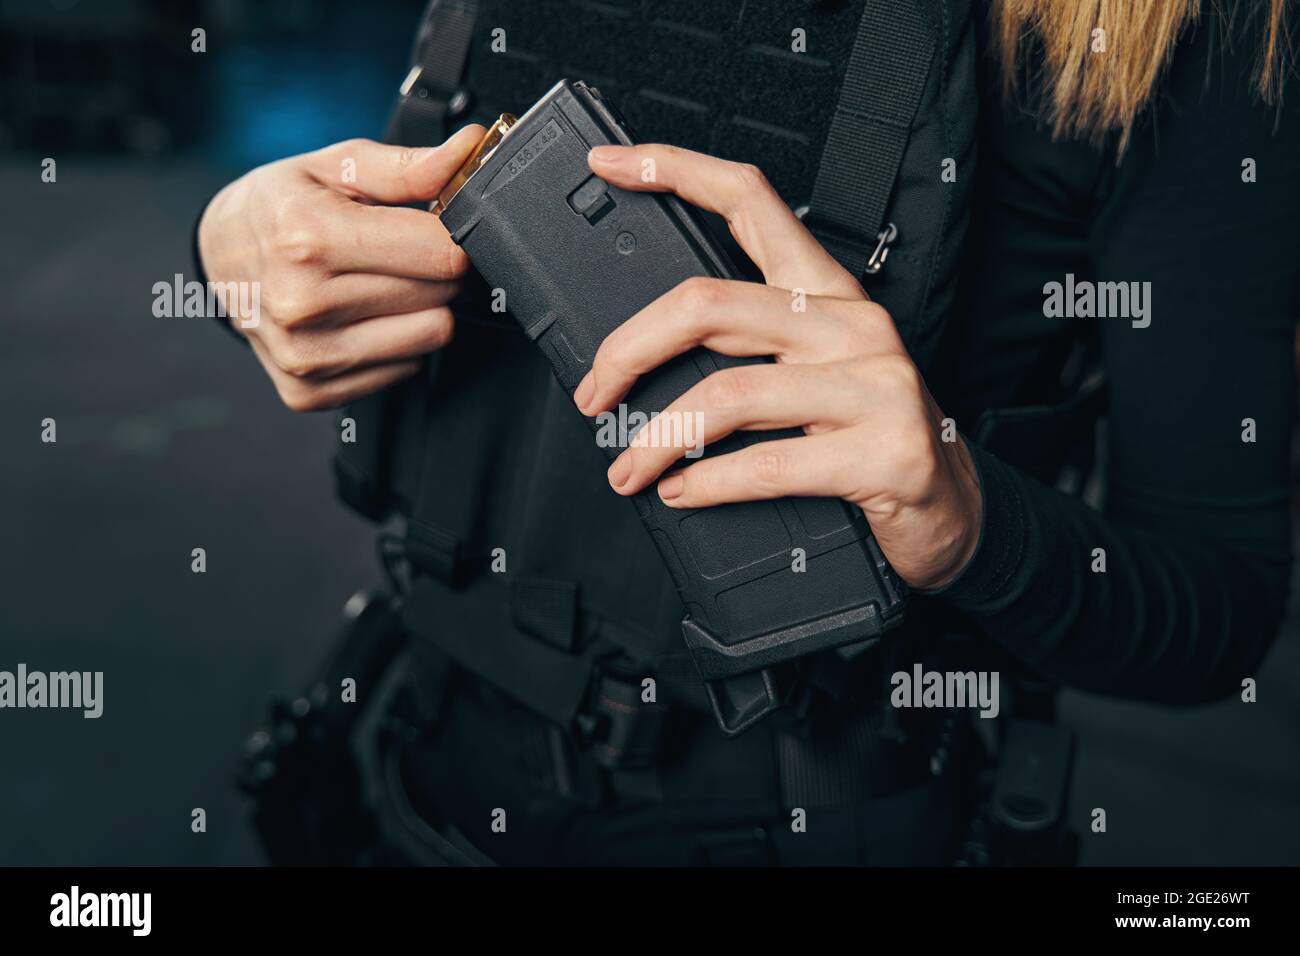 Skilled Caucasian female shooter loading her weapon Stock Photo